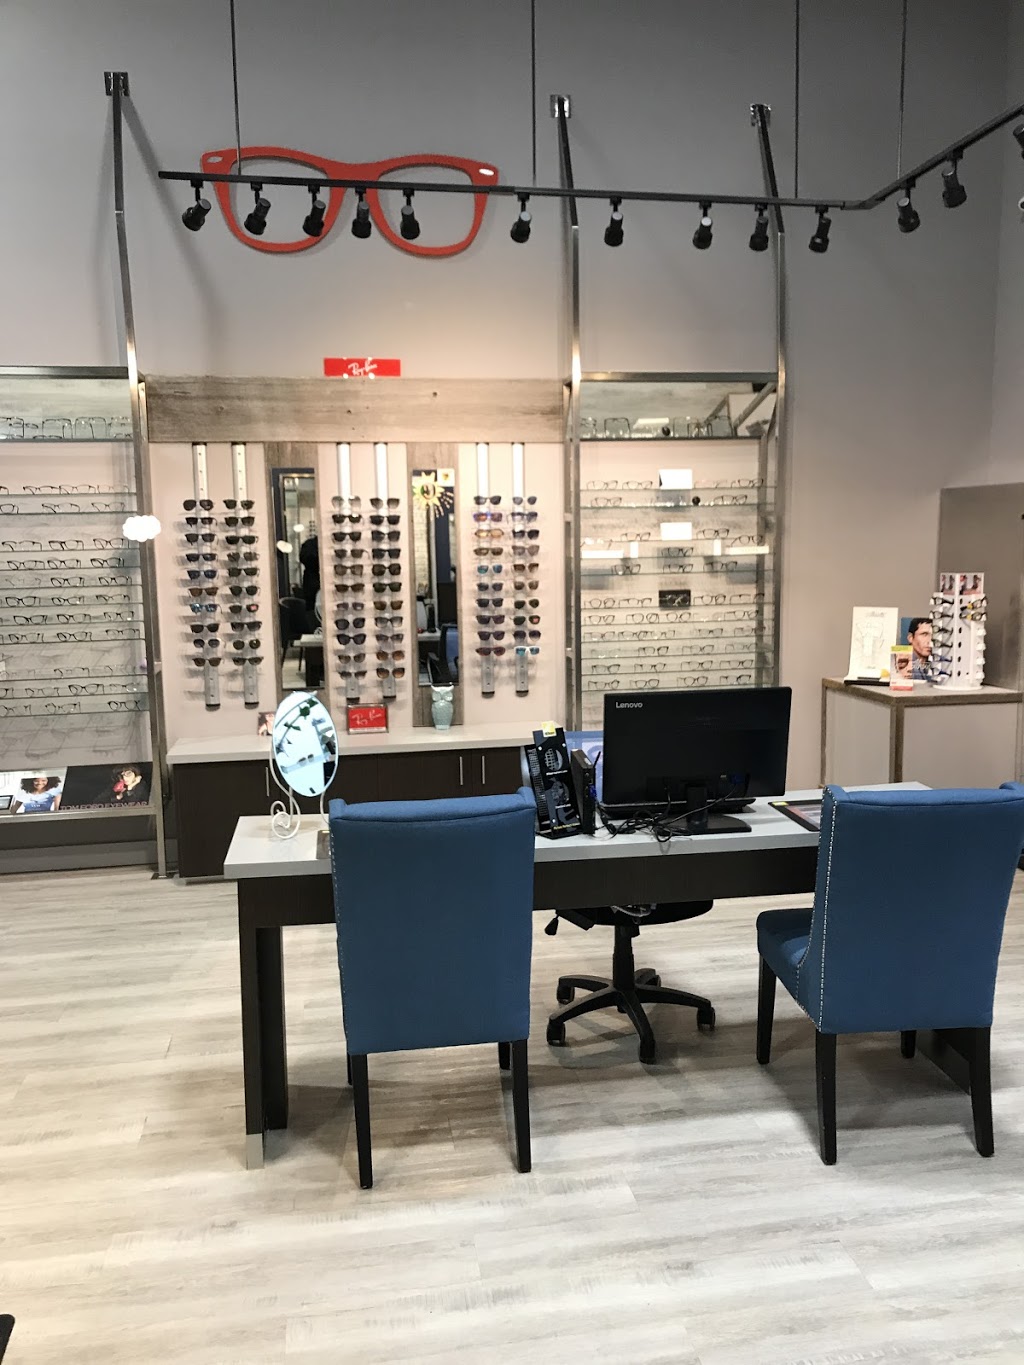 Ancaster Family Eyecare | 1146 Wilson St W # 4, Ancaster, ON L9G 3K9, Canada | Phone: (905) 769-2020